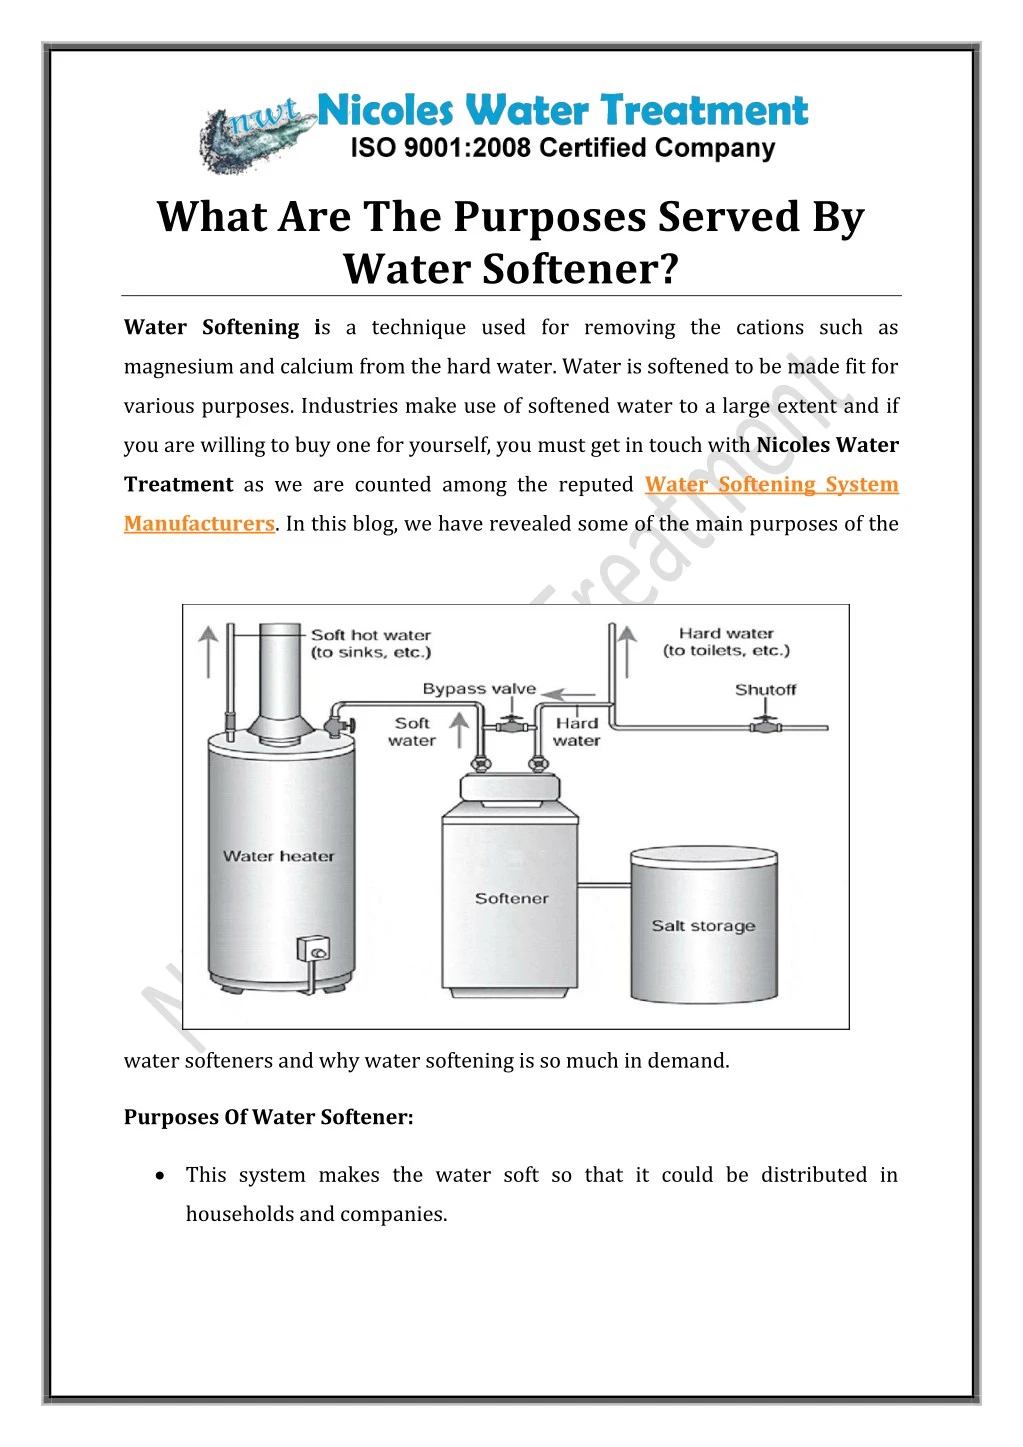 what are the purposes served by water softener